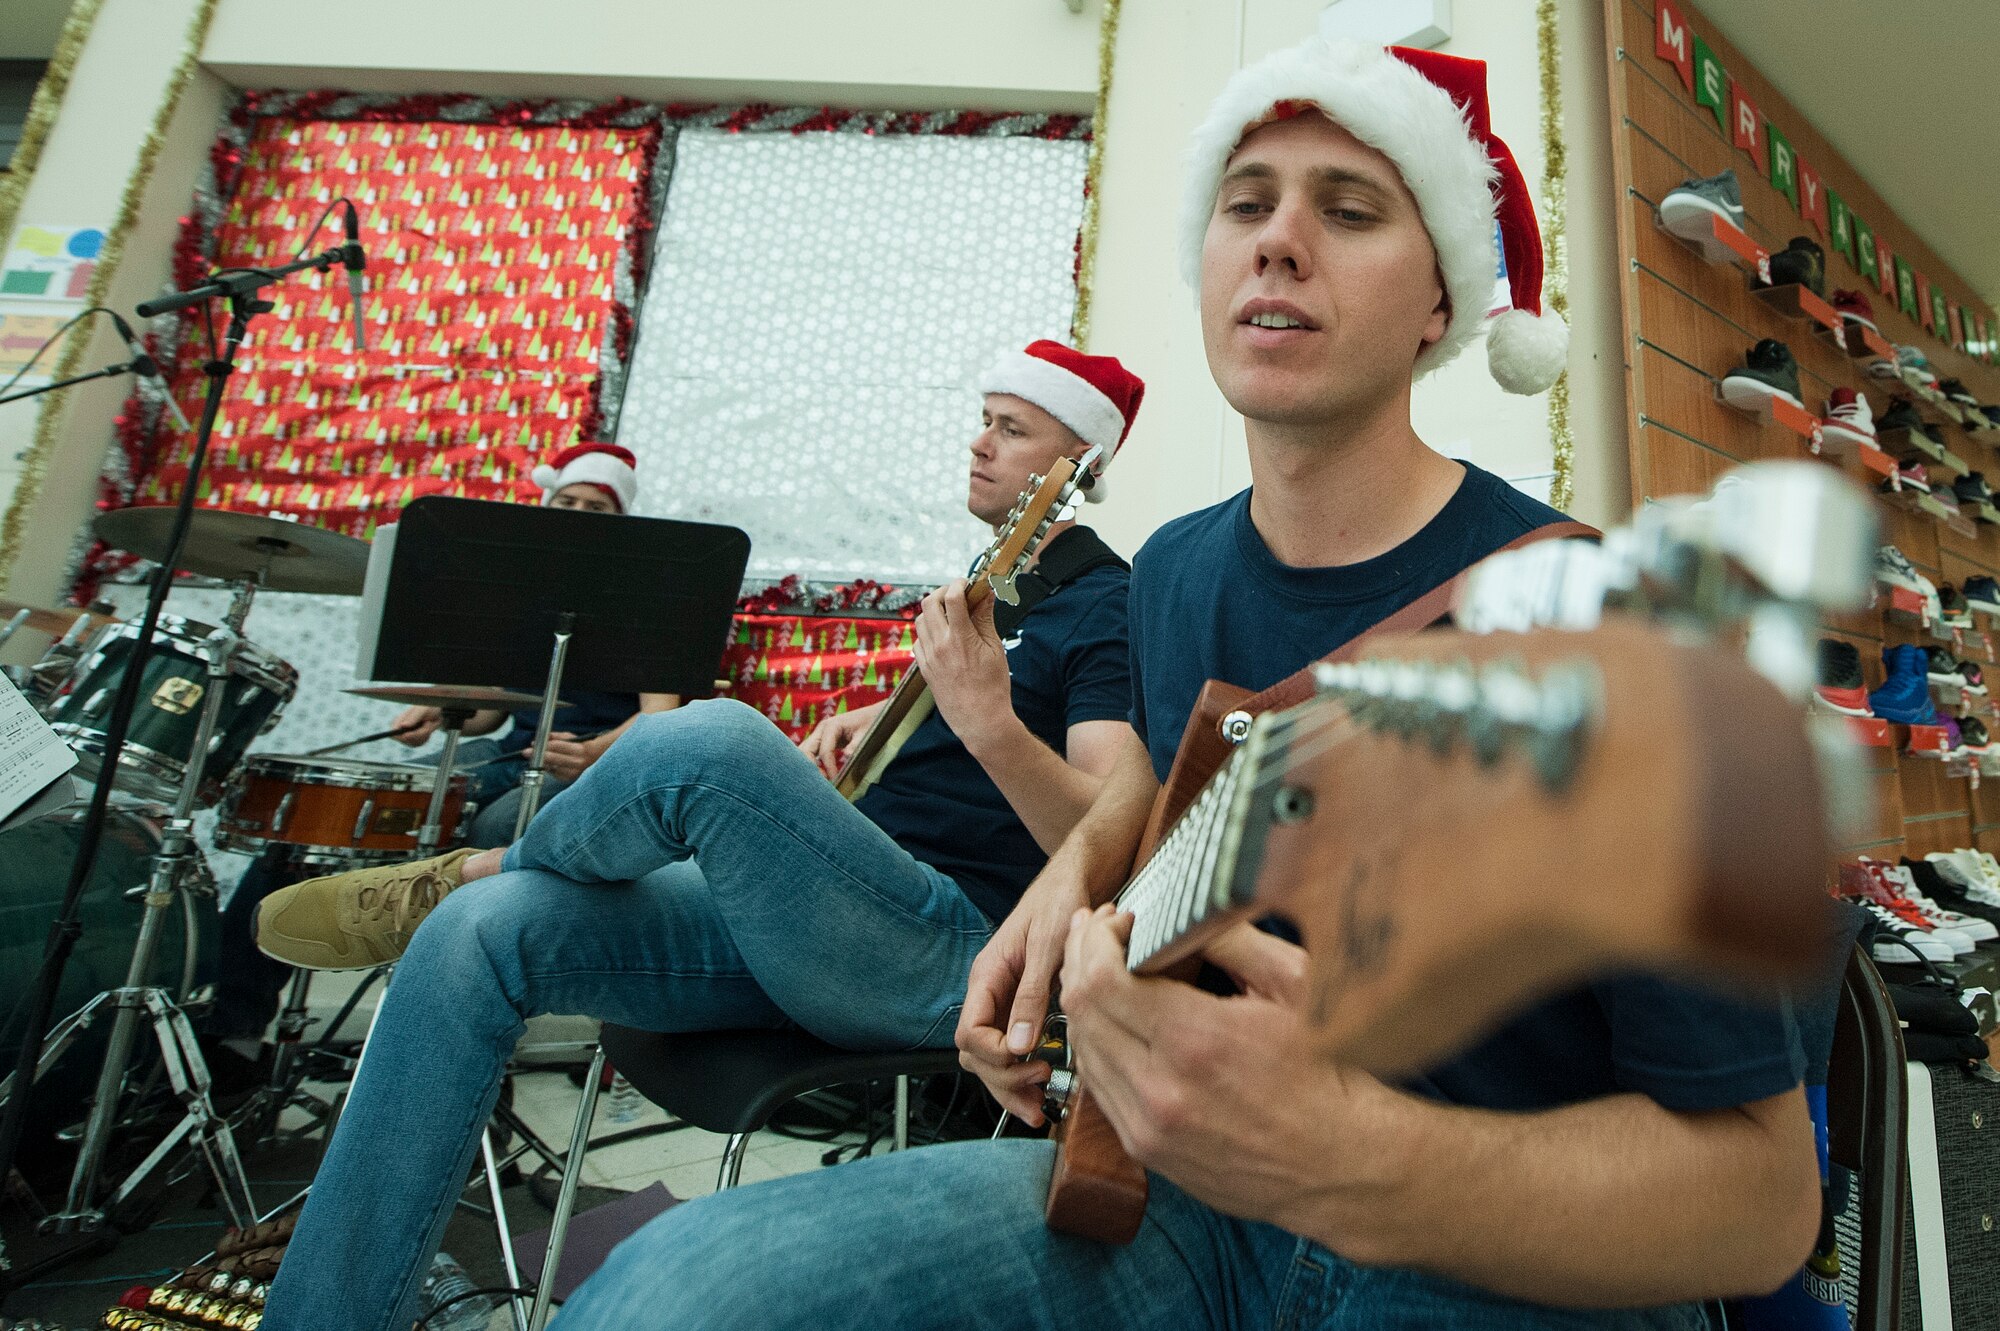 U.S. Air Force Senior Airman Guy James, foreground, U.S. Air Forces Central Command Band guitarist, and Staff Sgt. Bryan Andrews, AFCENT Band bassist, play holiday songs during a holiday kick-off event Dec. 1, 2018, at Al Udeid Air Base, Qatar. Service members and their families were able to play holiday games, watch live music performances, interact with Santa Claus and watch a tree lighting ceremony, during the event. (U.S. Air Force photo by Tech. Sgt. Christopher Hubenthal)